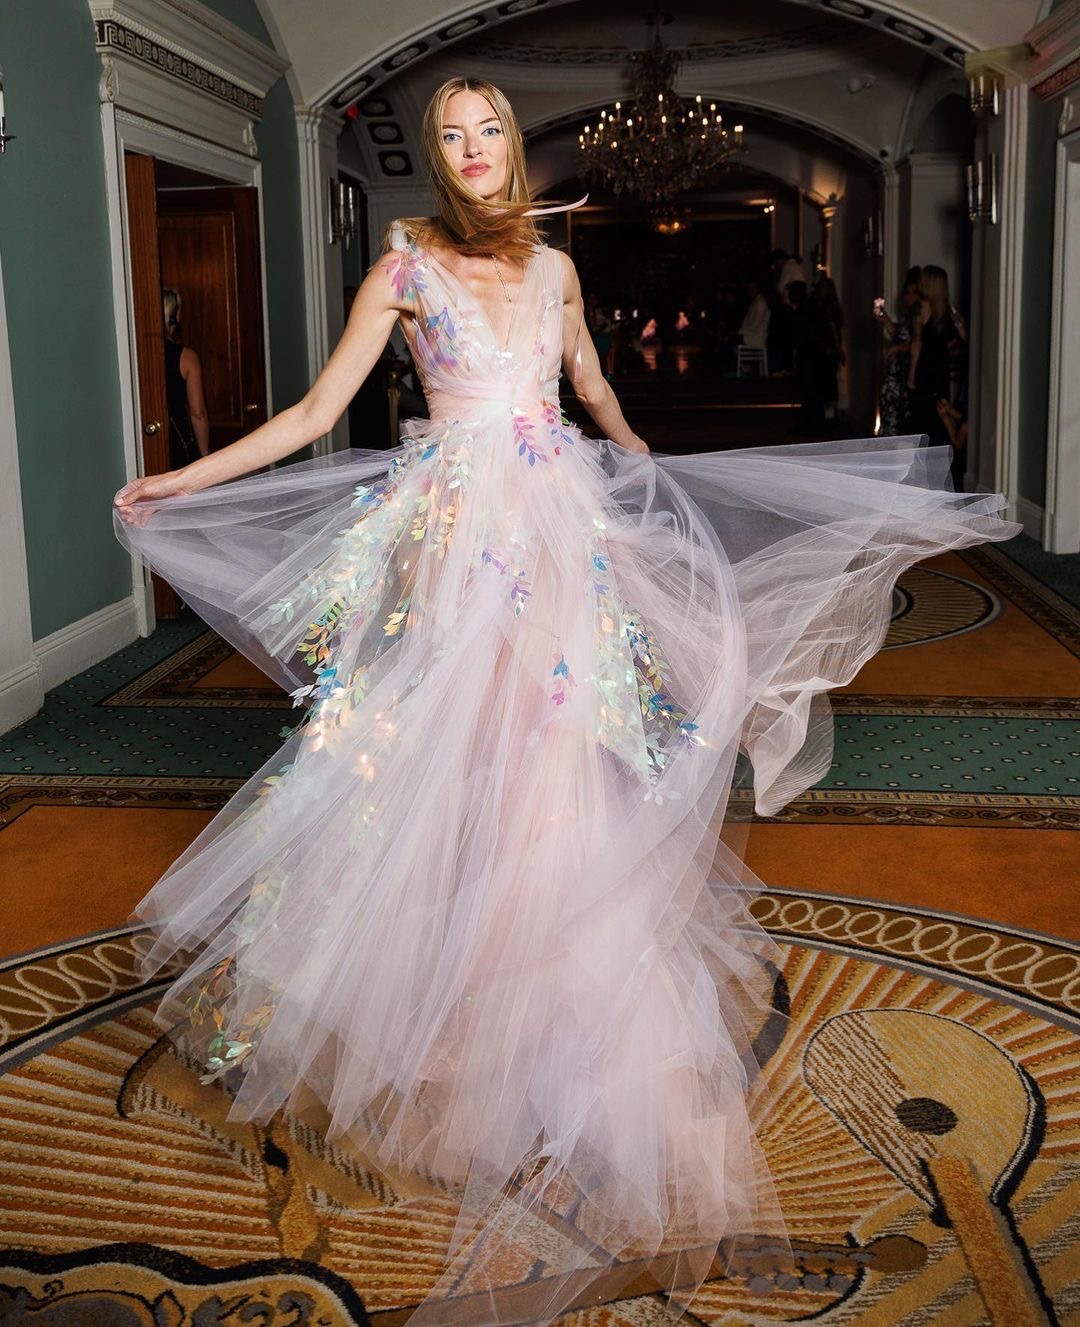 Christian Siriano Celebrated His 15th Anniversary at New York Fashion Week with Bold and Modern Ballerina Silhouettes 5